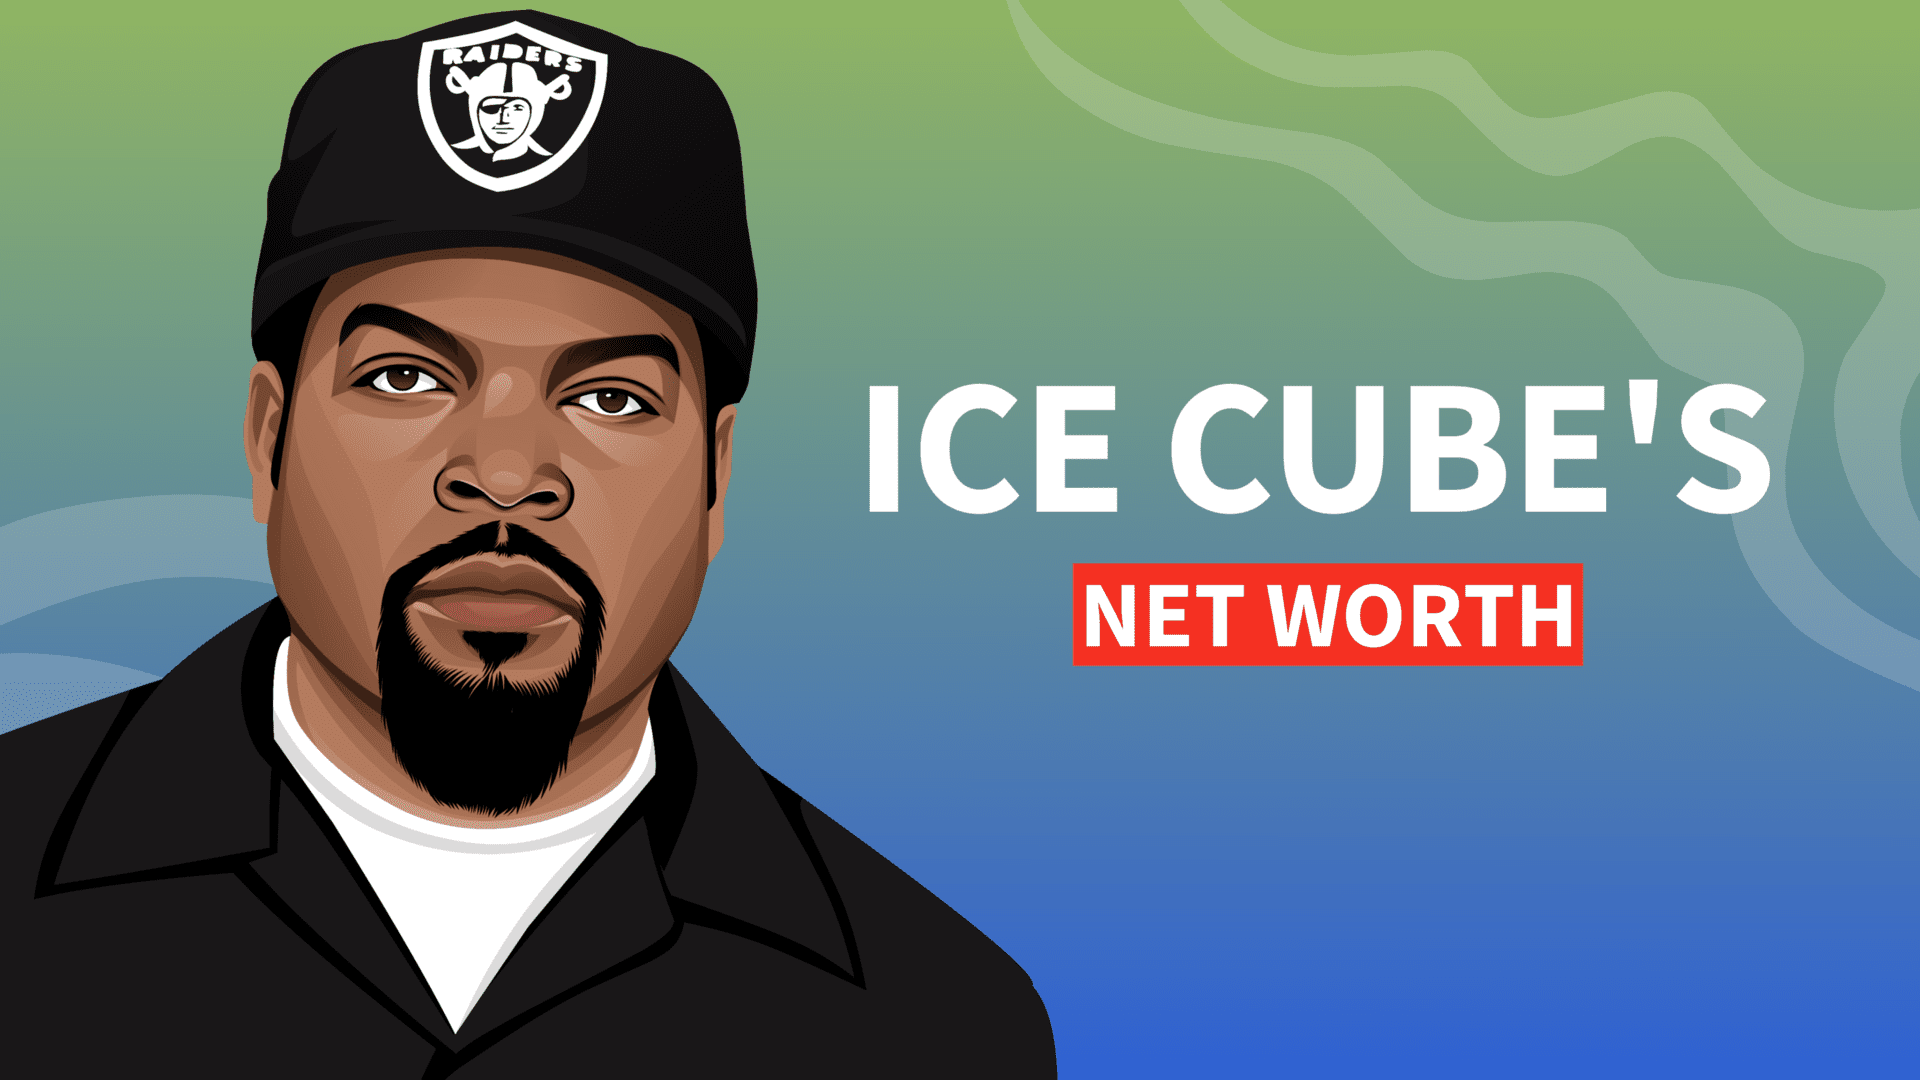 How Many Kids Does Ice Cube Have?